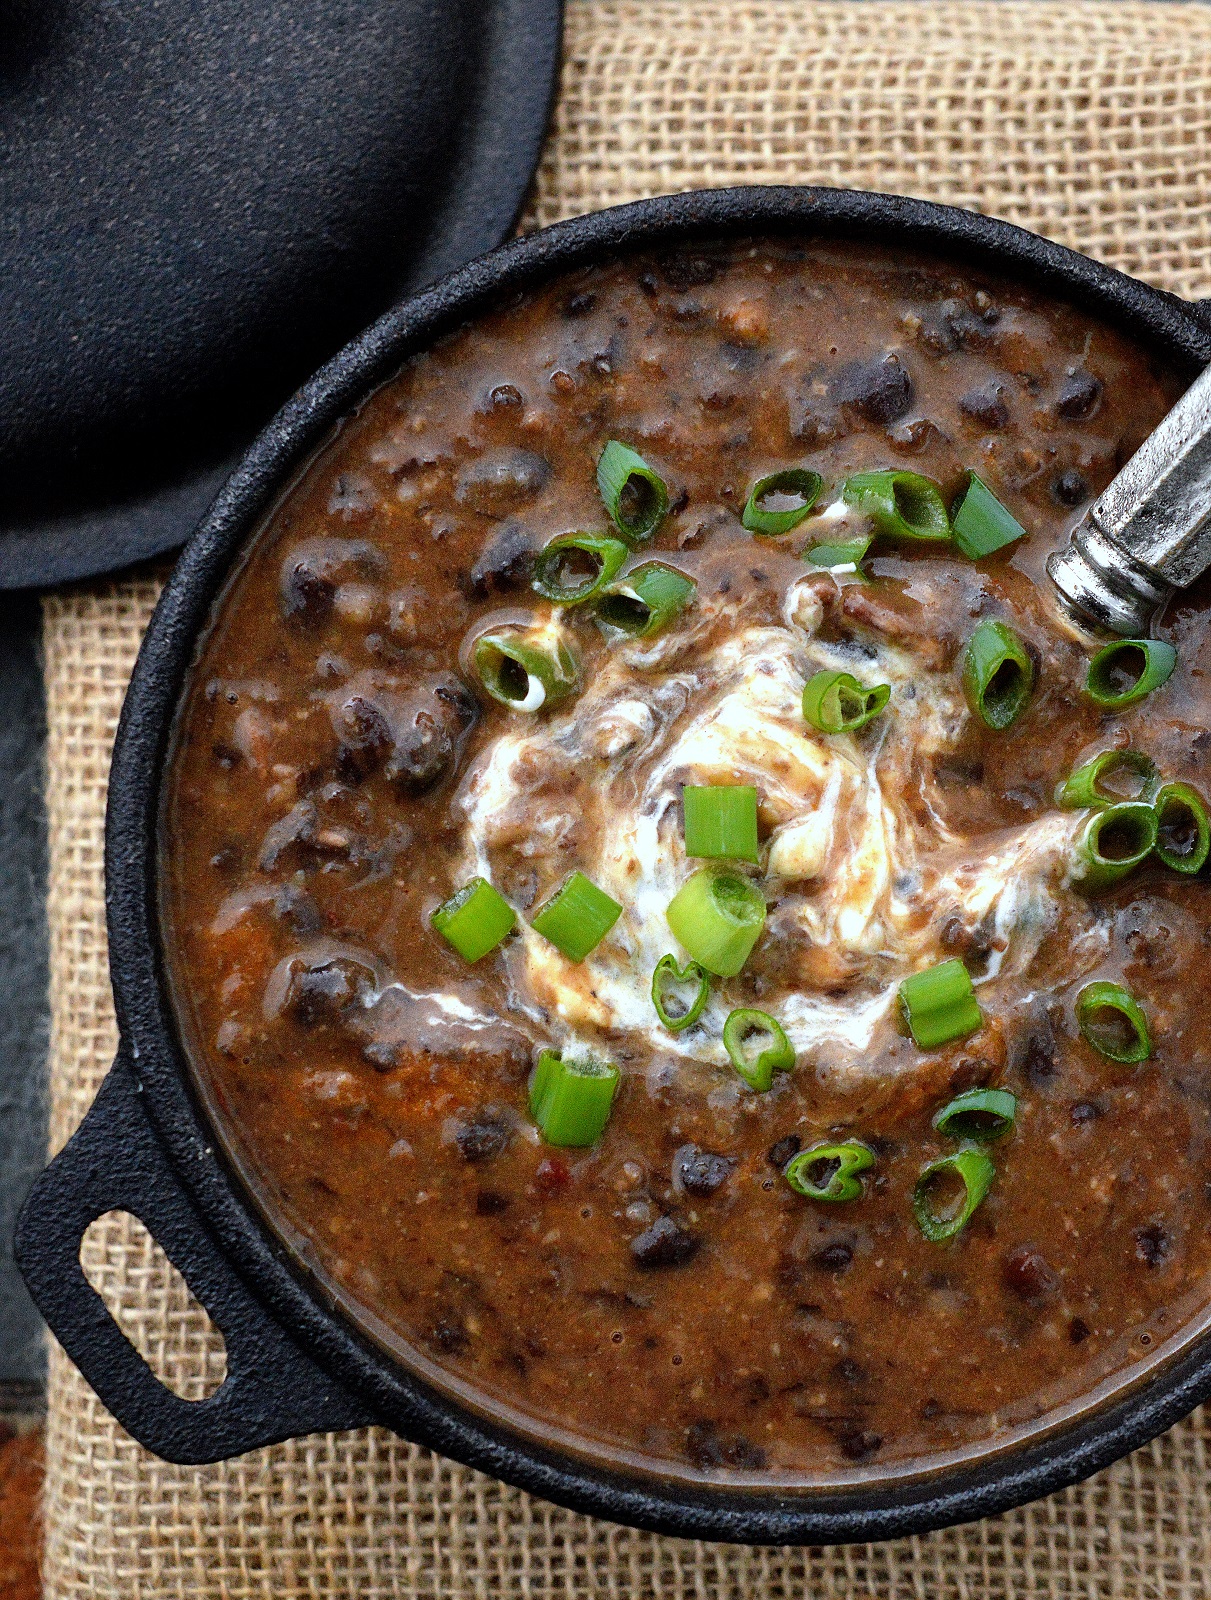 Classic Spicy Black Bean Soup Recipe - Bacon helps give this soup big flavor!